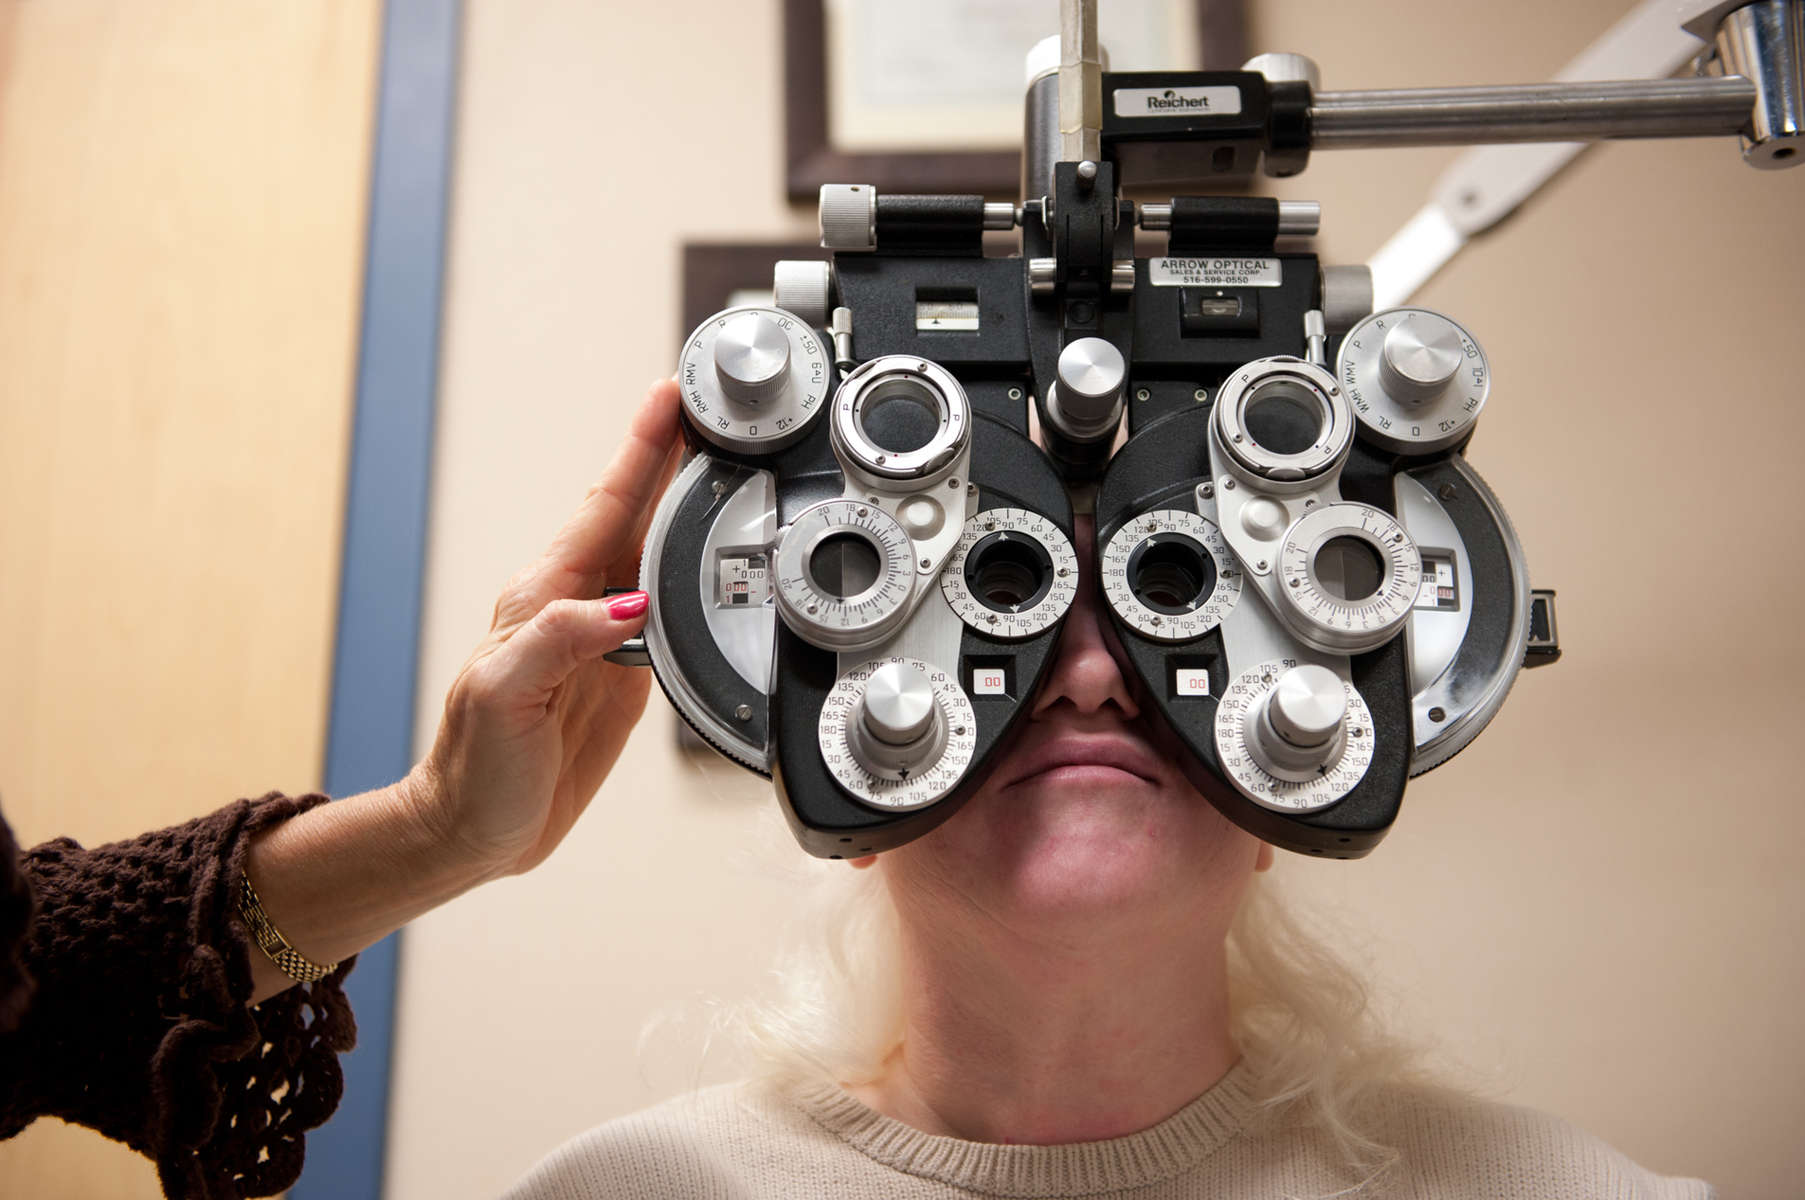 Dr. Gwen Gnadt uses a Phoropter on patient Cindy Fagan to determine the proper eyeglass prescription for her during an eye exam at Eye Vision Associates in Lake Ronkonkoma. (Mar. 1, 2012) Photo by Nancy Borowick